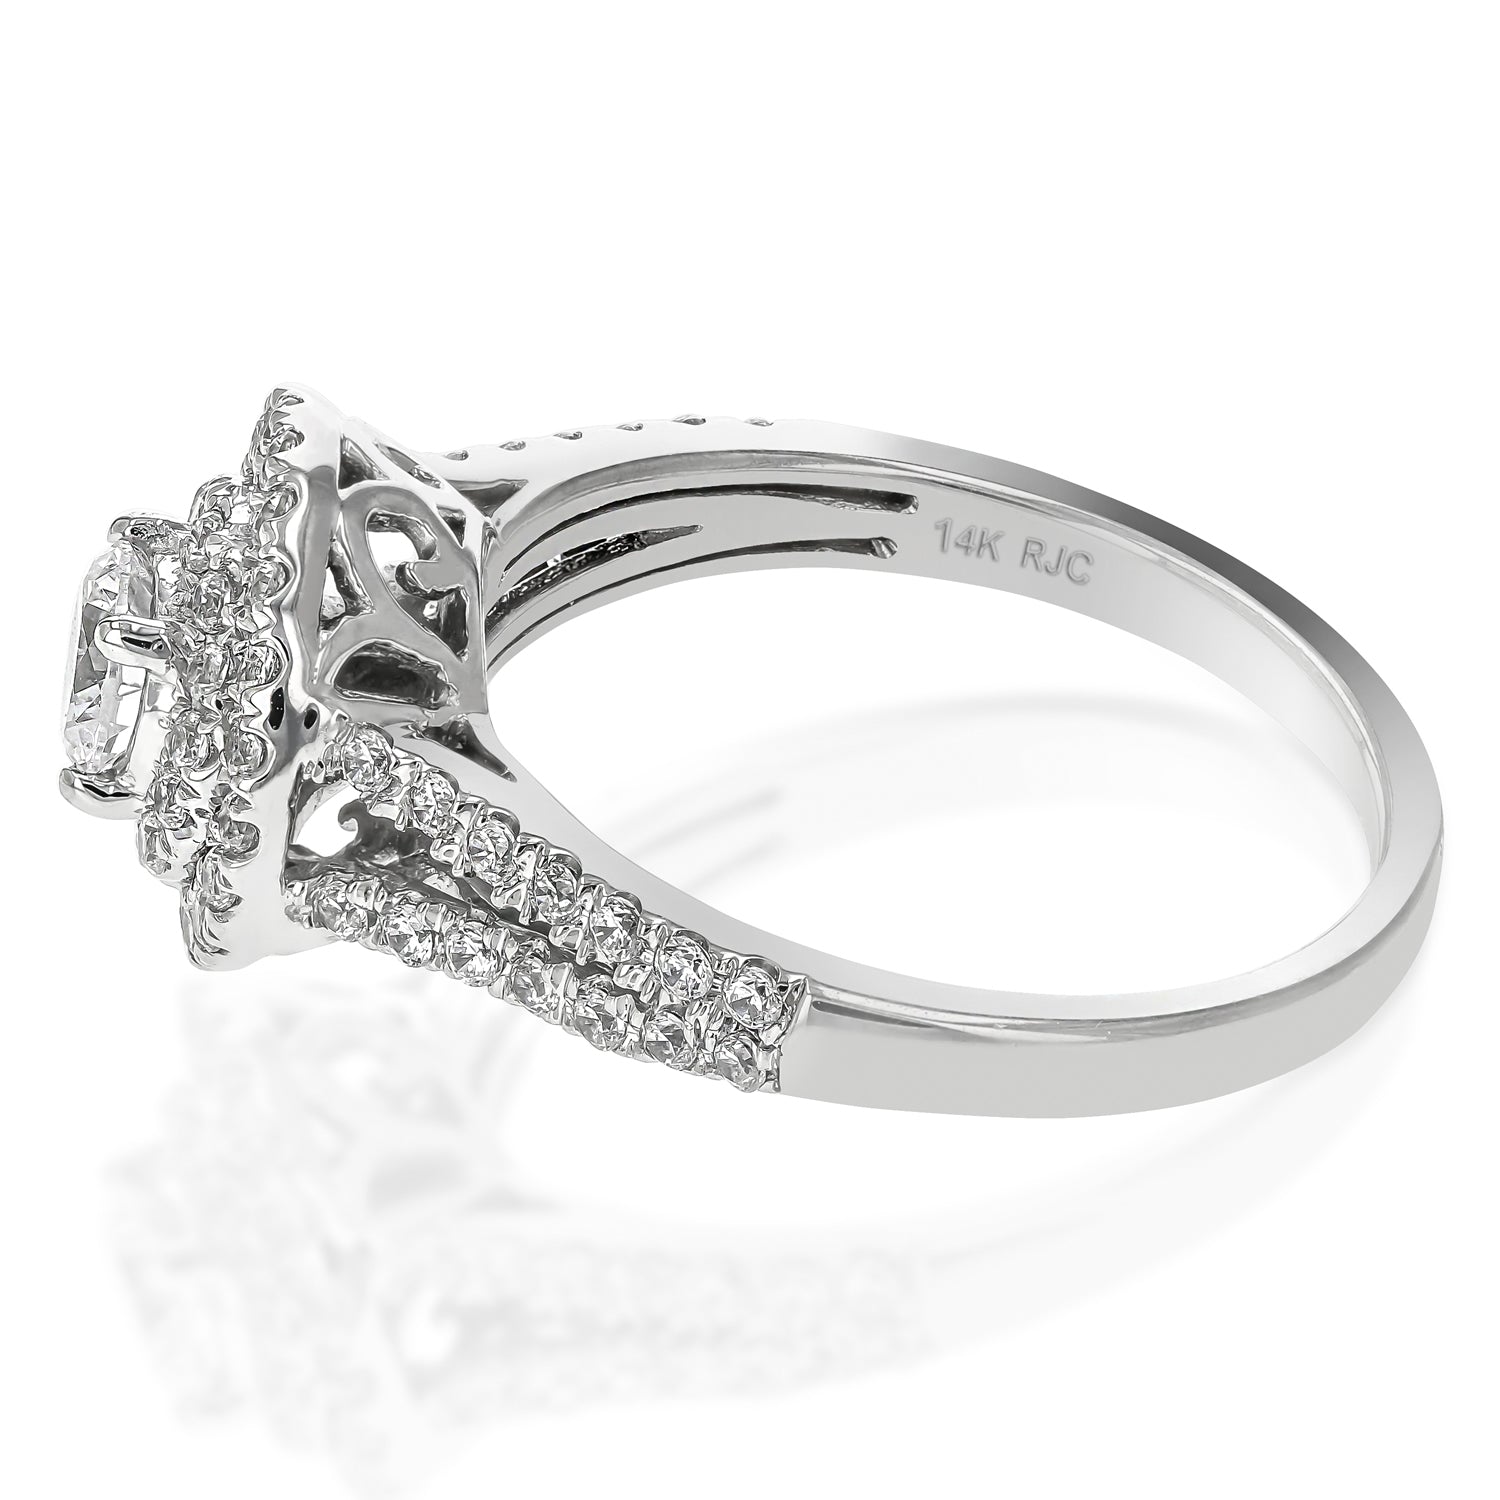 1 cttw 14k White Gold Diamond Ring Bridal Style With Double Round Frame Halo